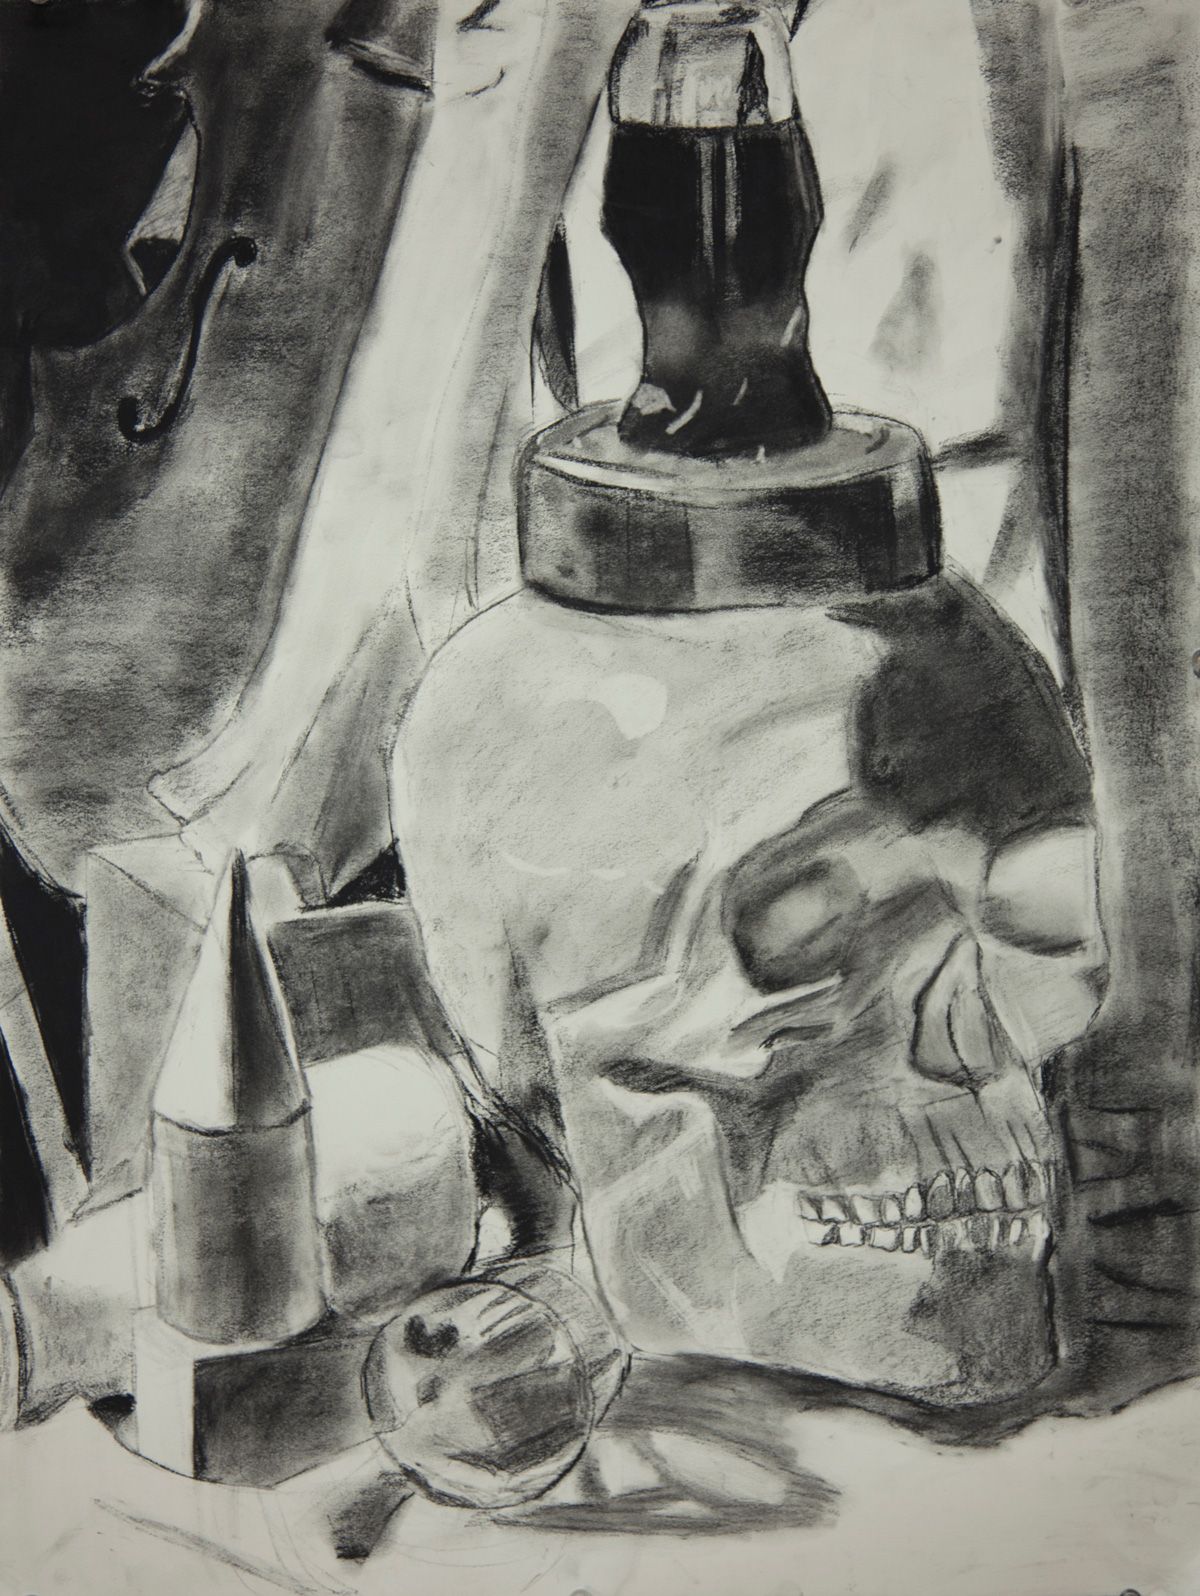 Tommy Costello, “Skull Still-Life” - 2016, Charcoal on Strathmore, 24 x 18 in.